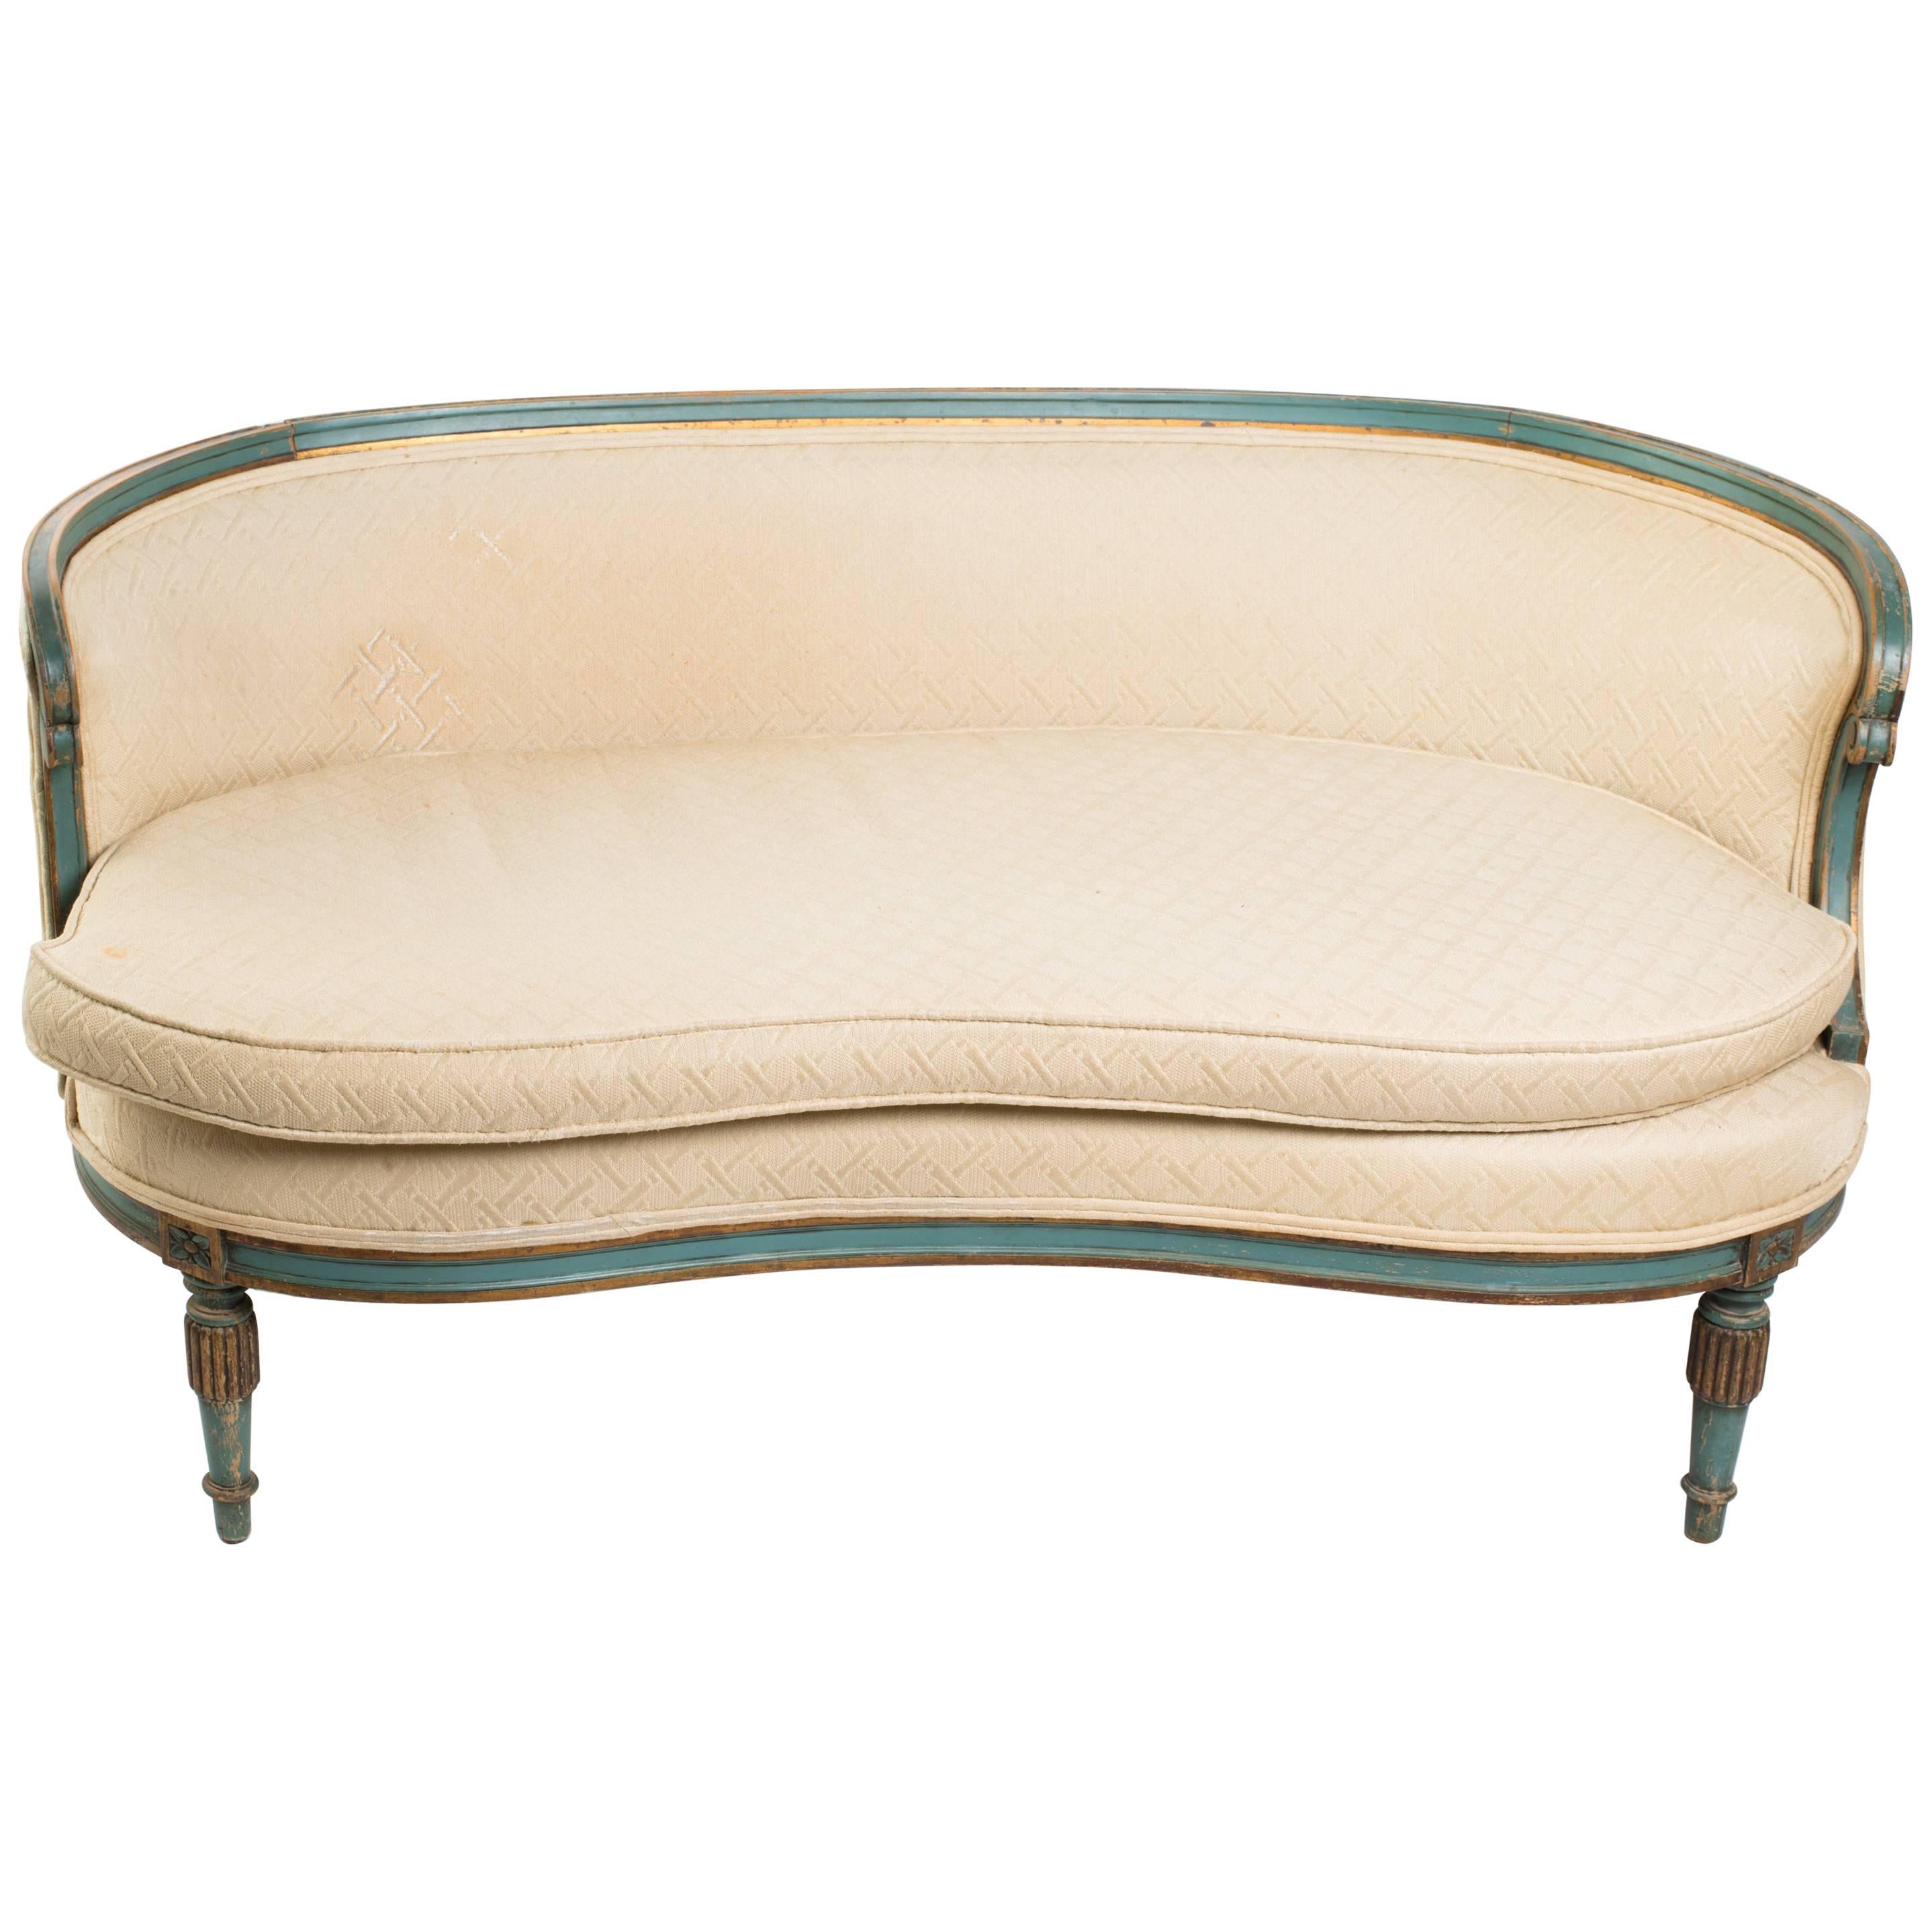 French Regency  Curved Settee